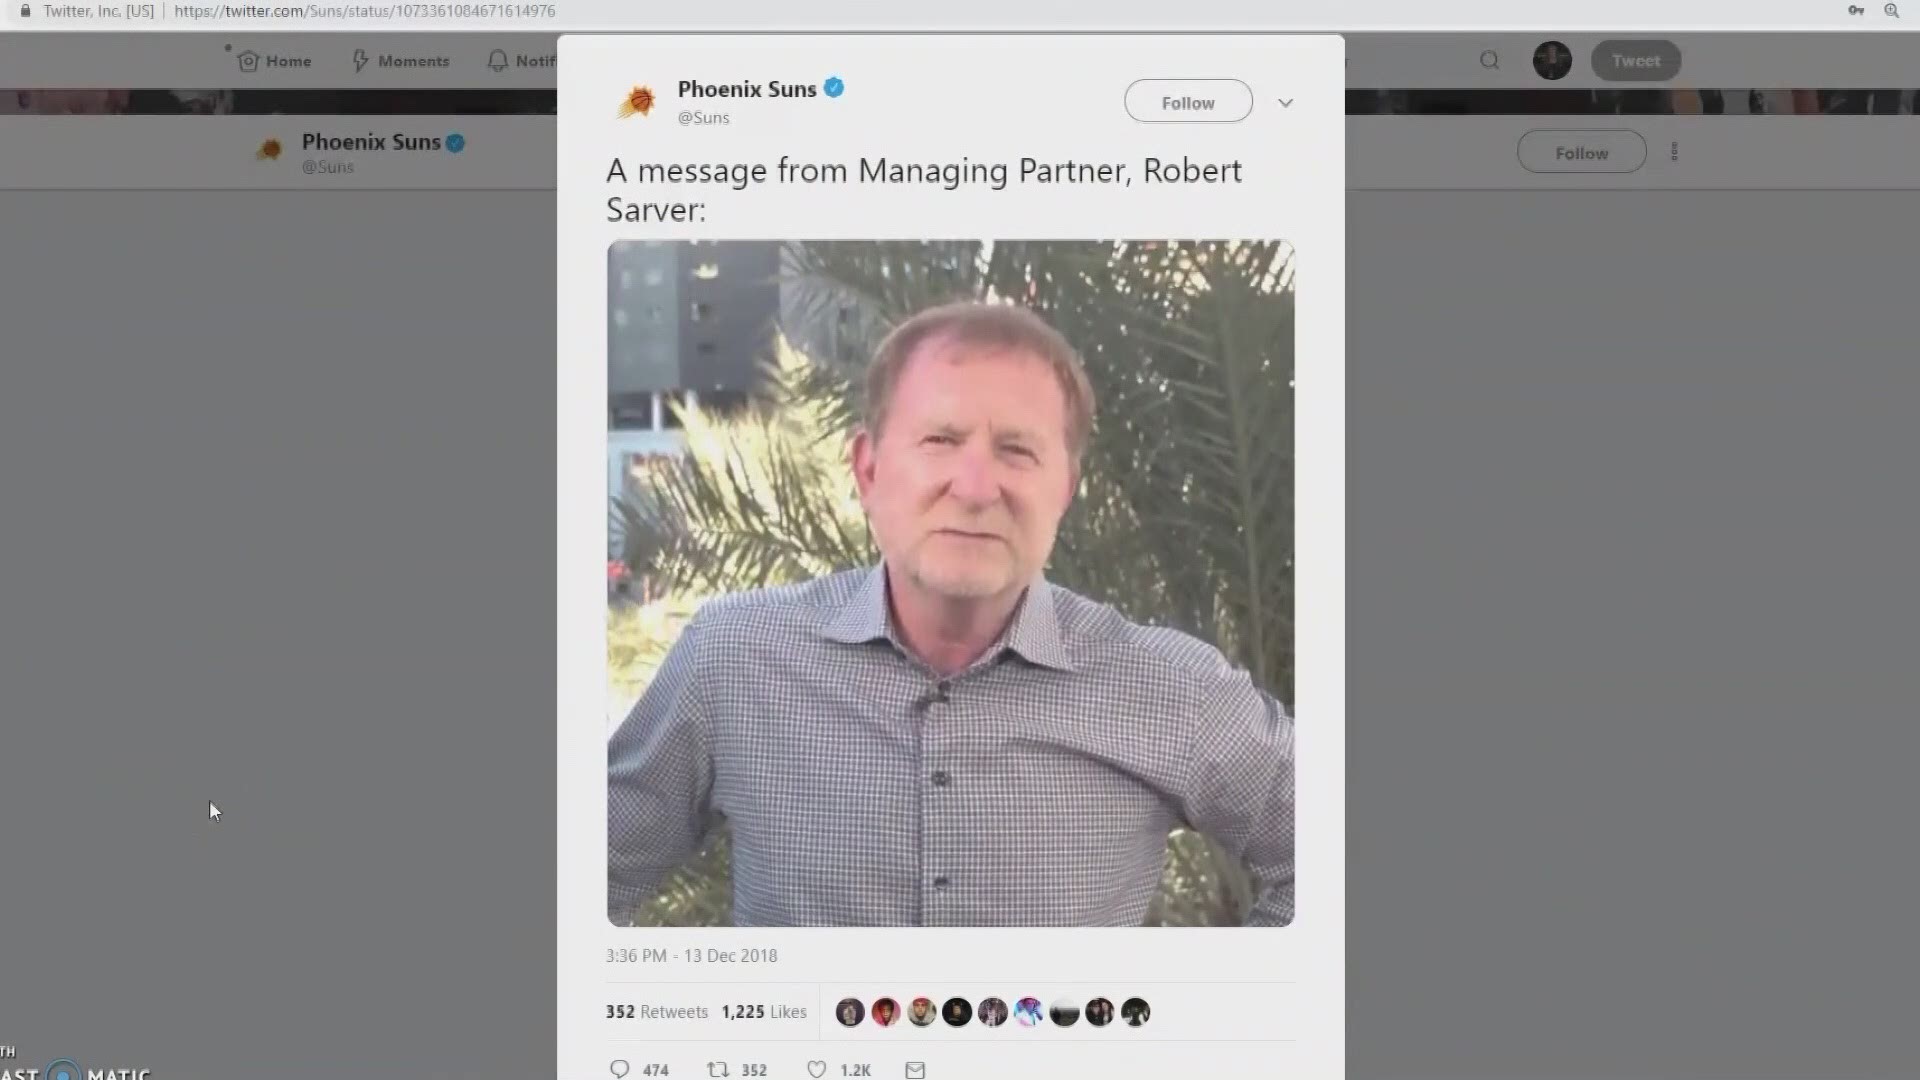 There were reports yesterday that Suns owner Robert Sarver was threatening to move the team to Las Vegas or Seattle if the city council doesn't approve $150 million for renovations to the Talking Stick Resort Arena. Tonight, Sarver and fans address the threat.